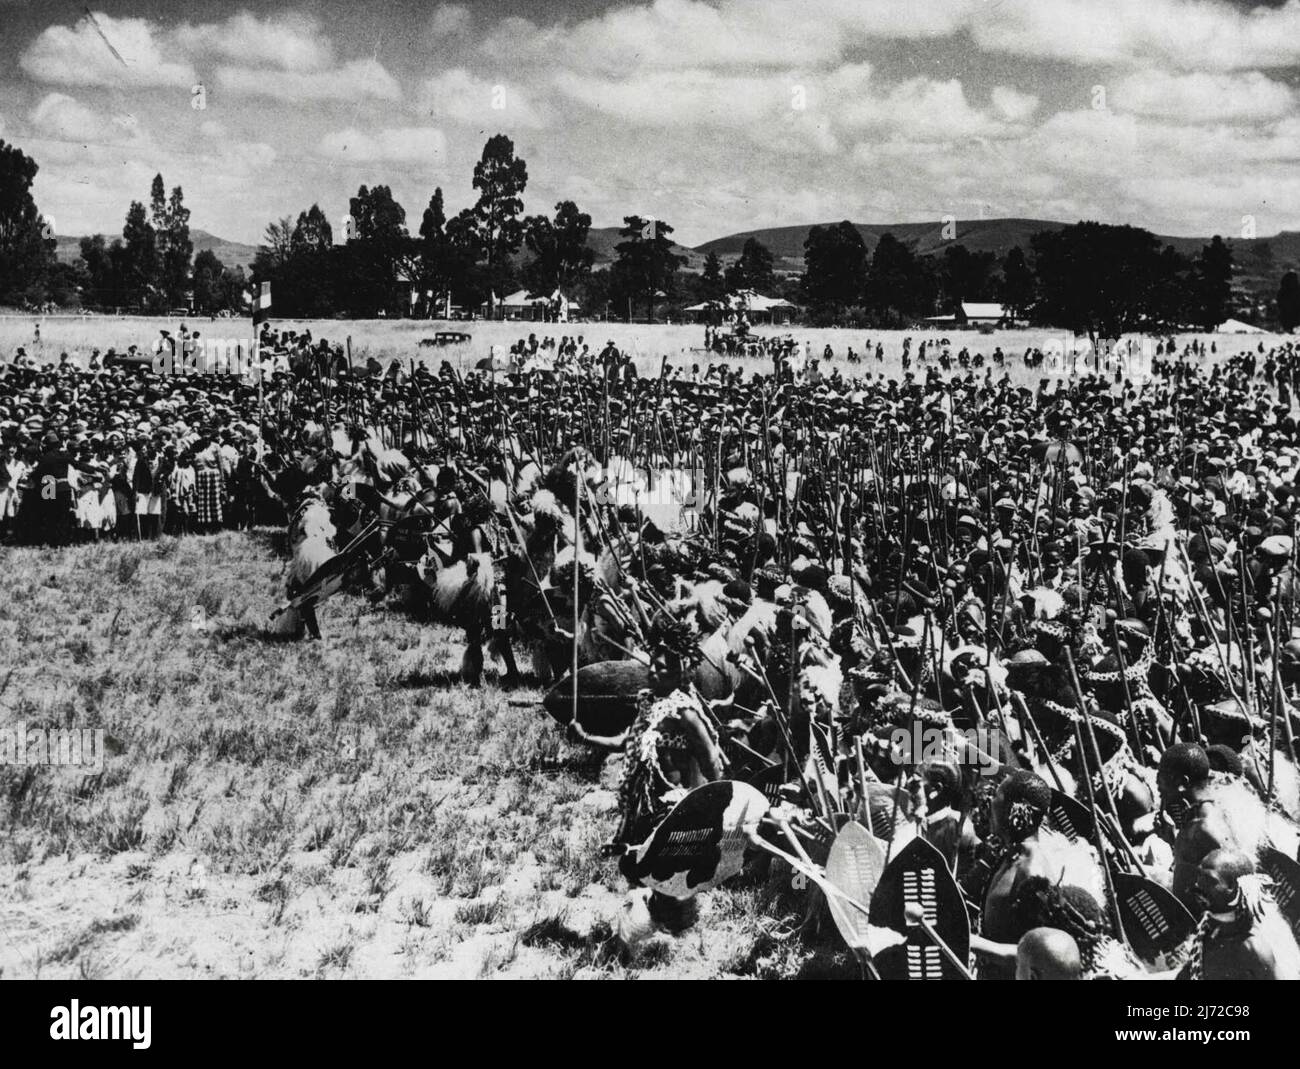 Five Thousand Zulus Dance For Princes George During His Tour Of South Africa -- A splendid spectacle of native Africa was provided for Prince George, when five thousand Zulus danced before him at a great Indaba, held at Pietermaritzburg, Natal, during the tour. The great mass of Zulu warriors and women advancing to dance before the Prince. April 24, 1934. (Photo by Sport & General Press Agency, Limited). Stock Photo